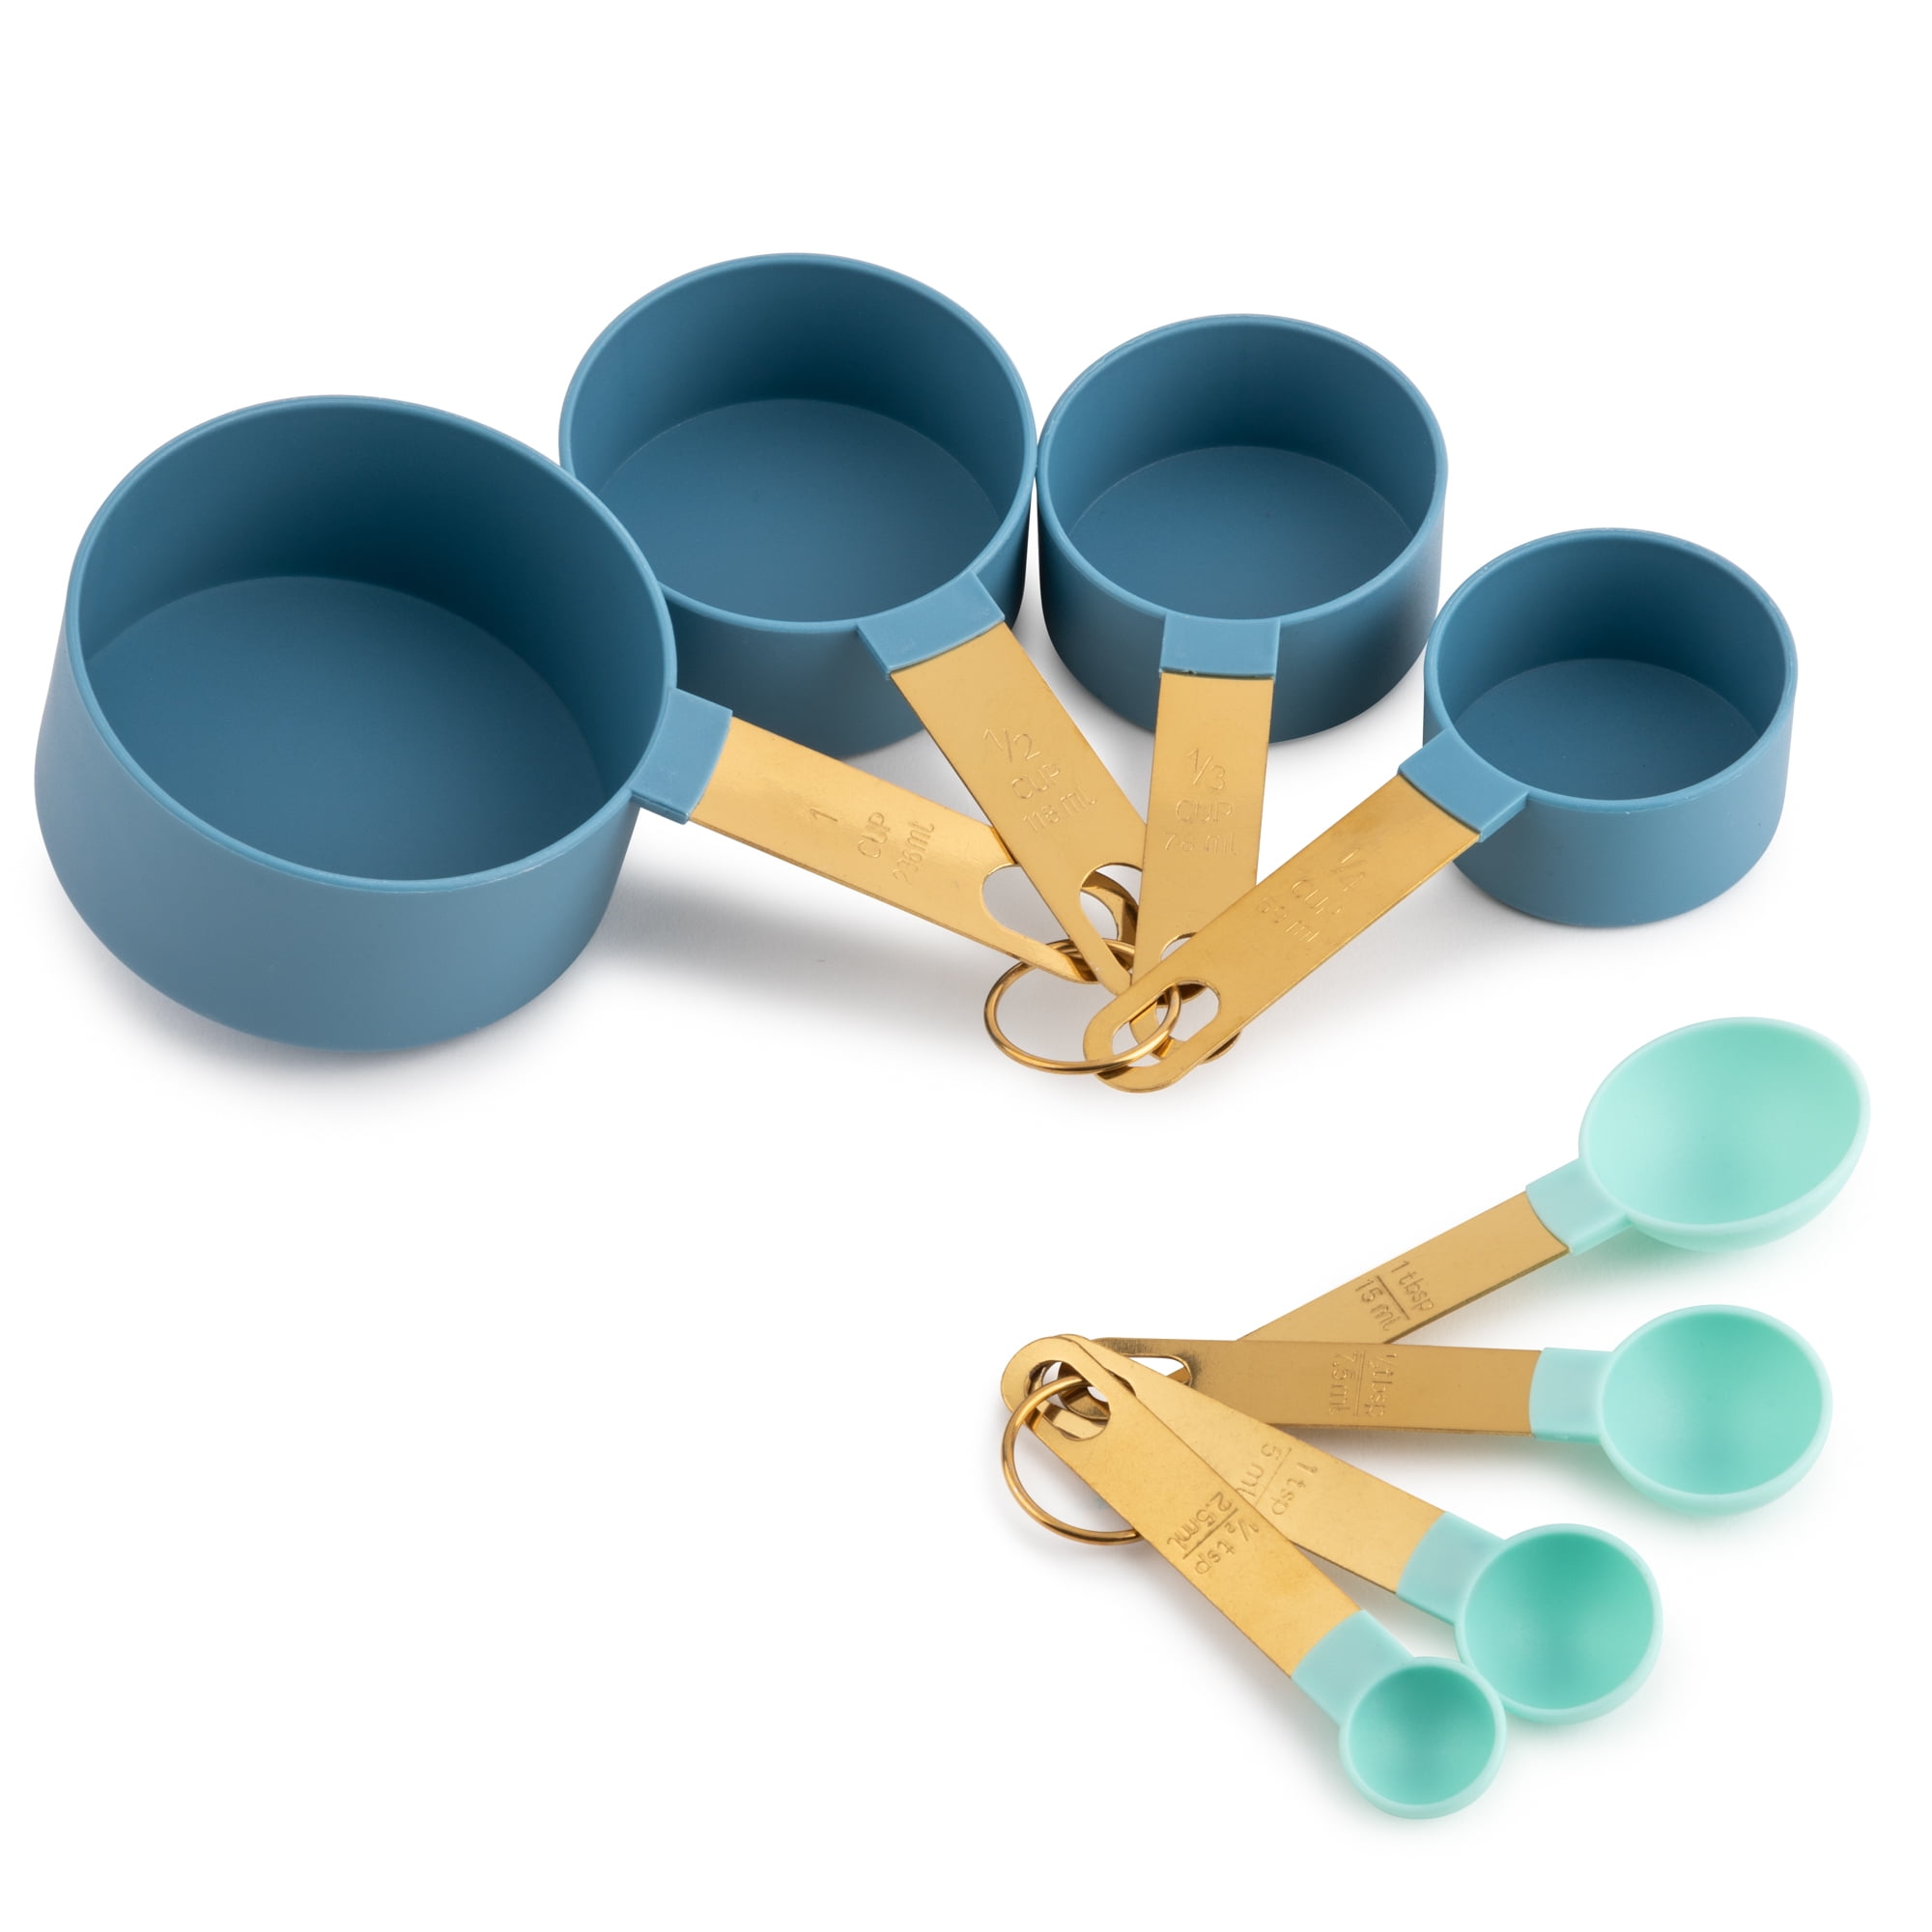 Precision Measuring Cups And Spoons Set - Essential Kitchen